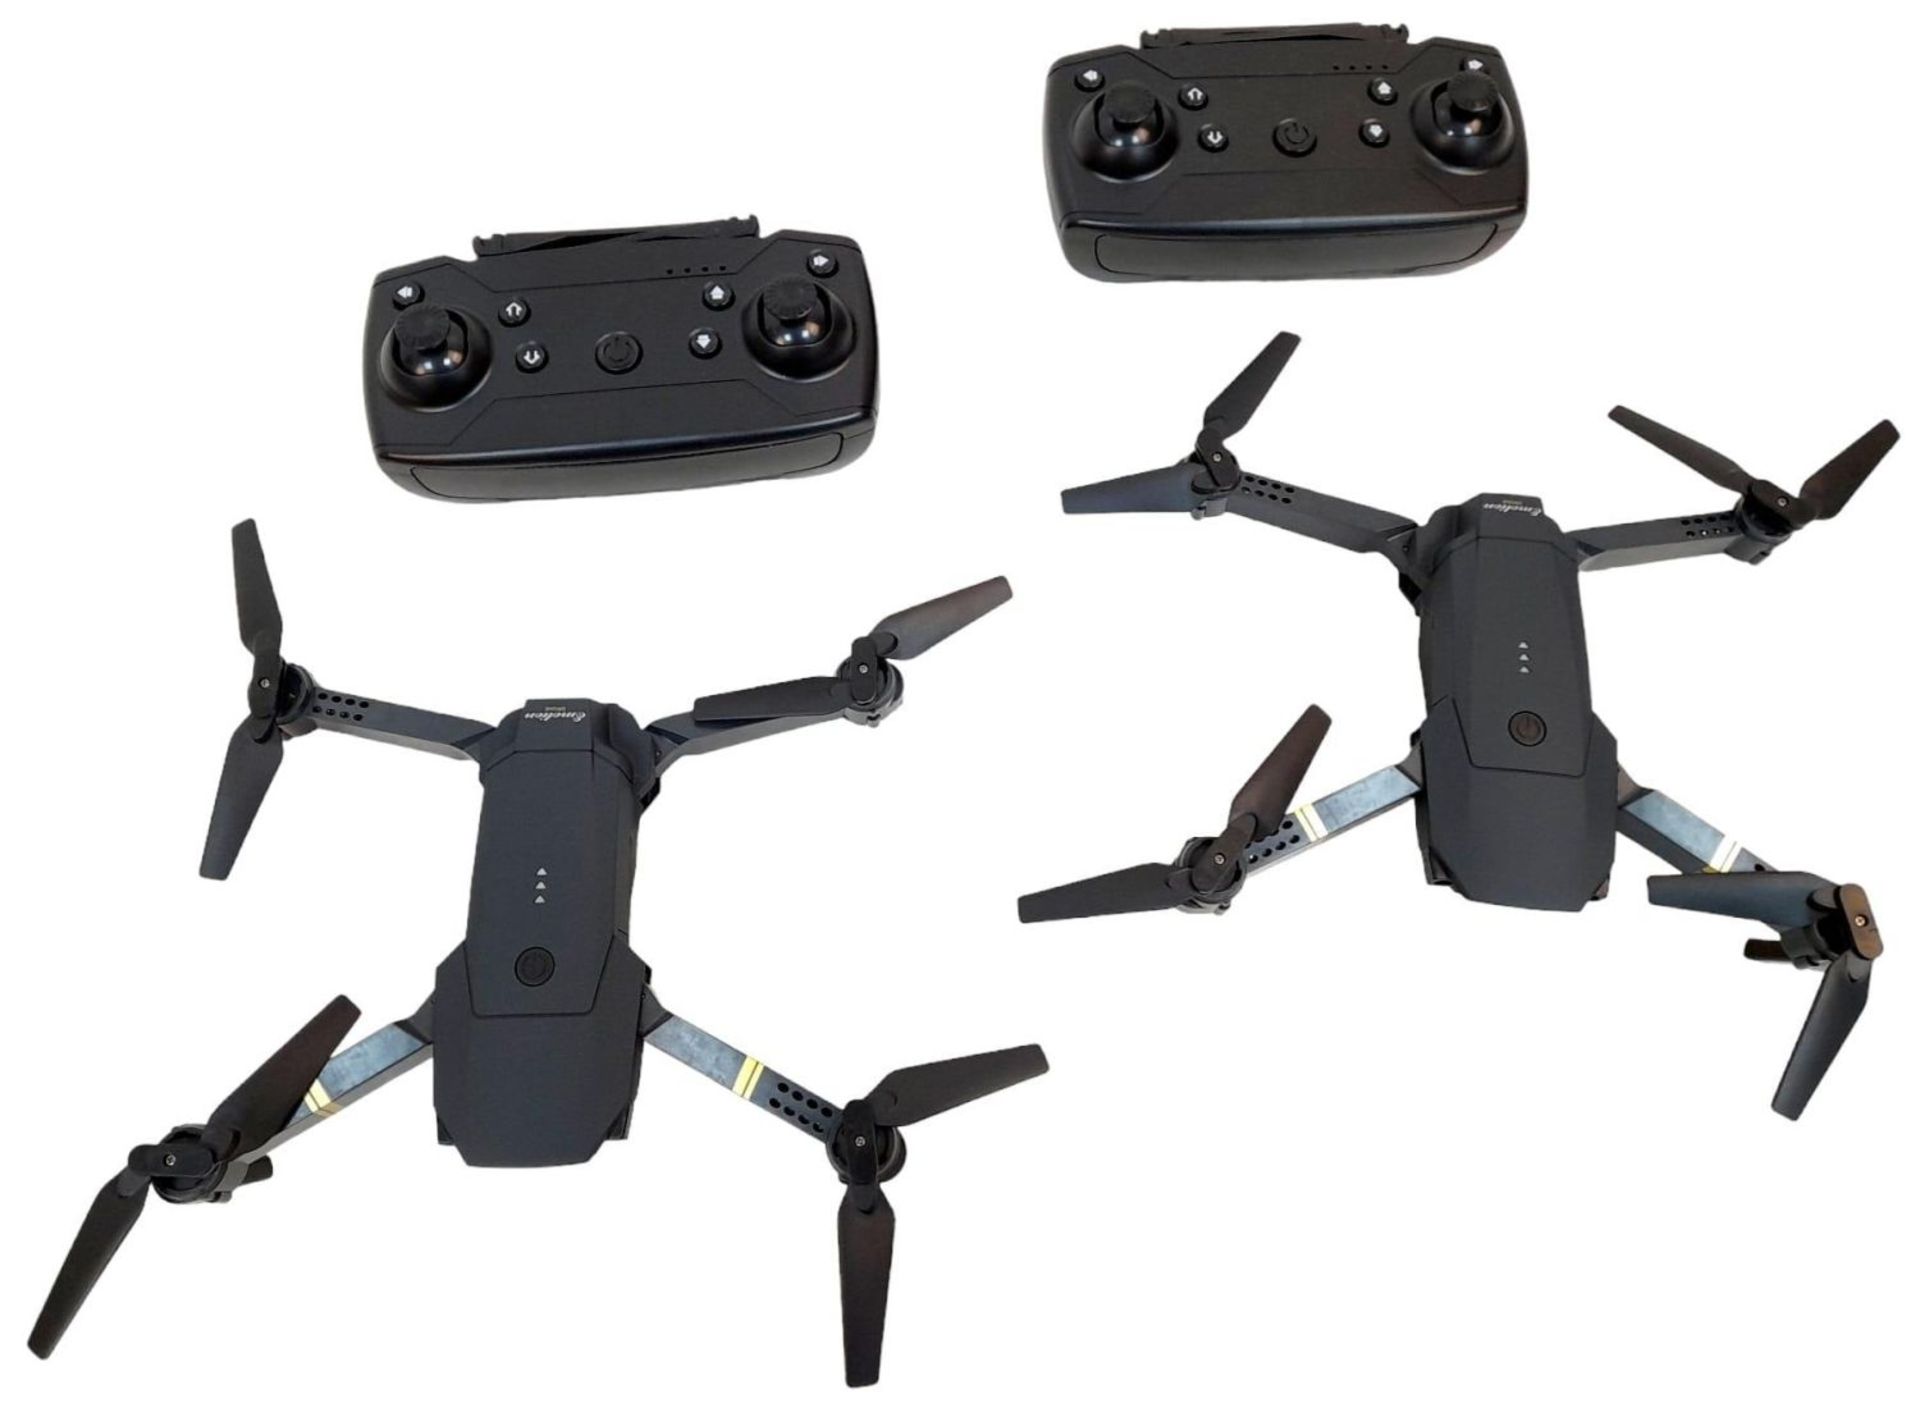 Two Xpro Wide Angle Remote Control Drones. In original packaging. As found. - Image 2 of 8